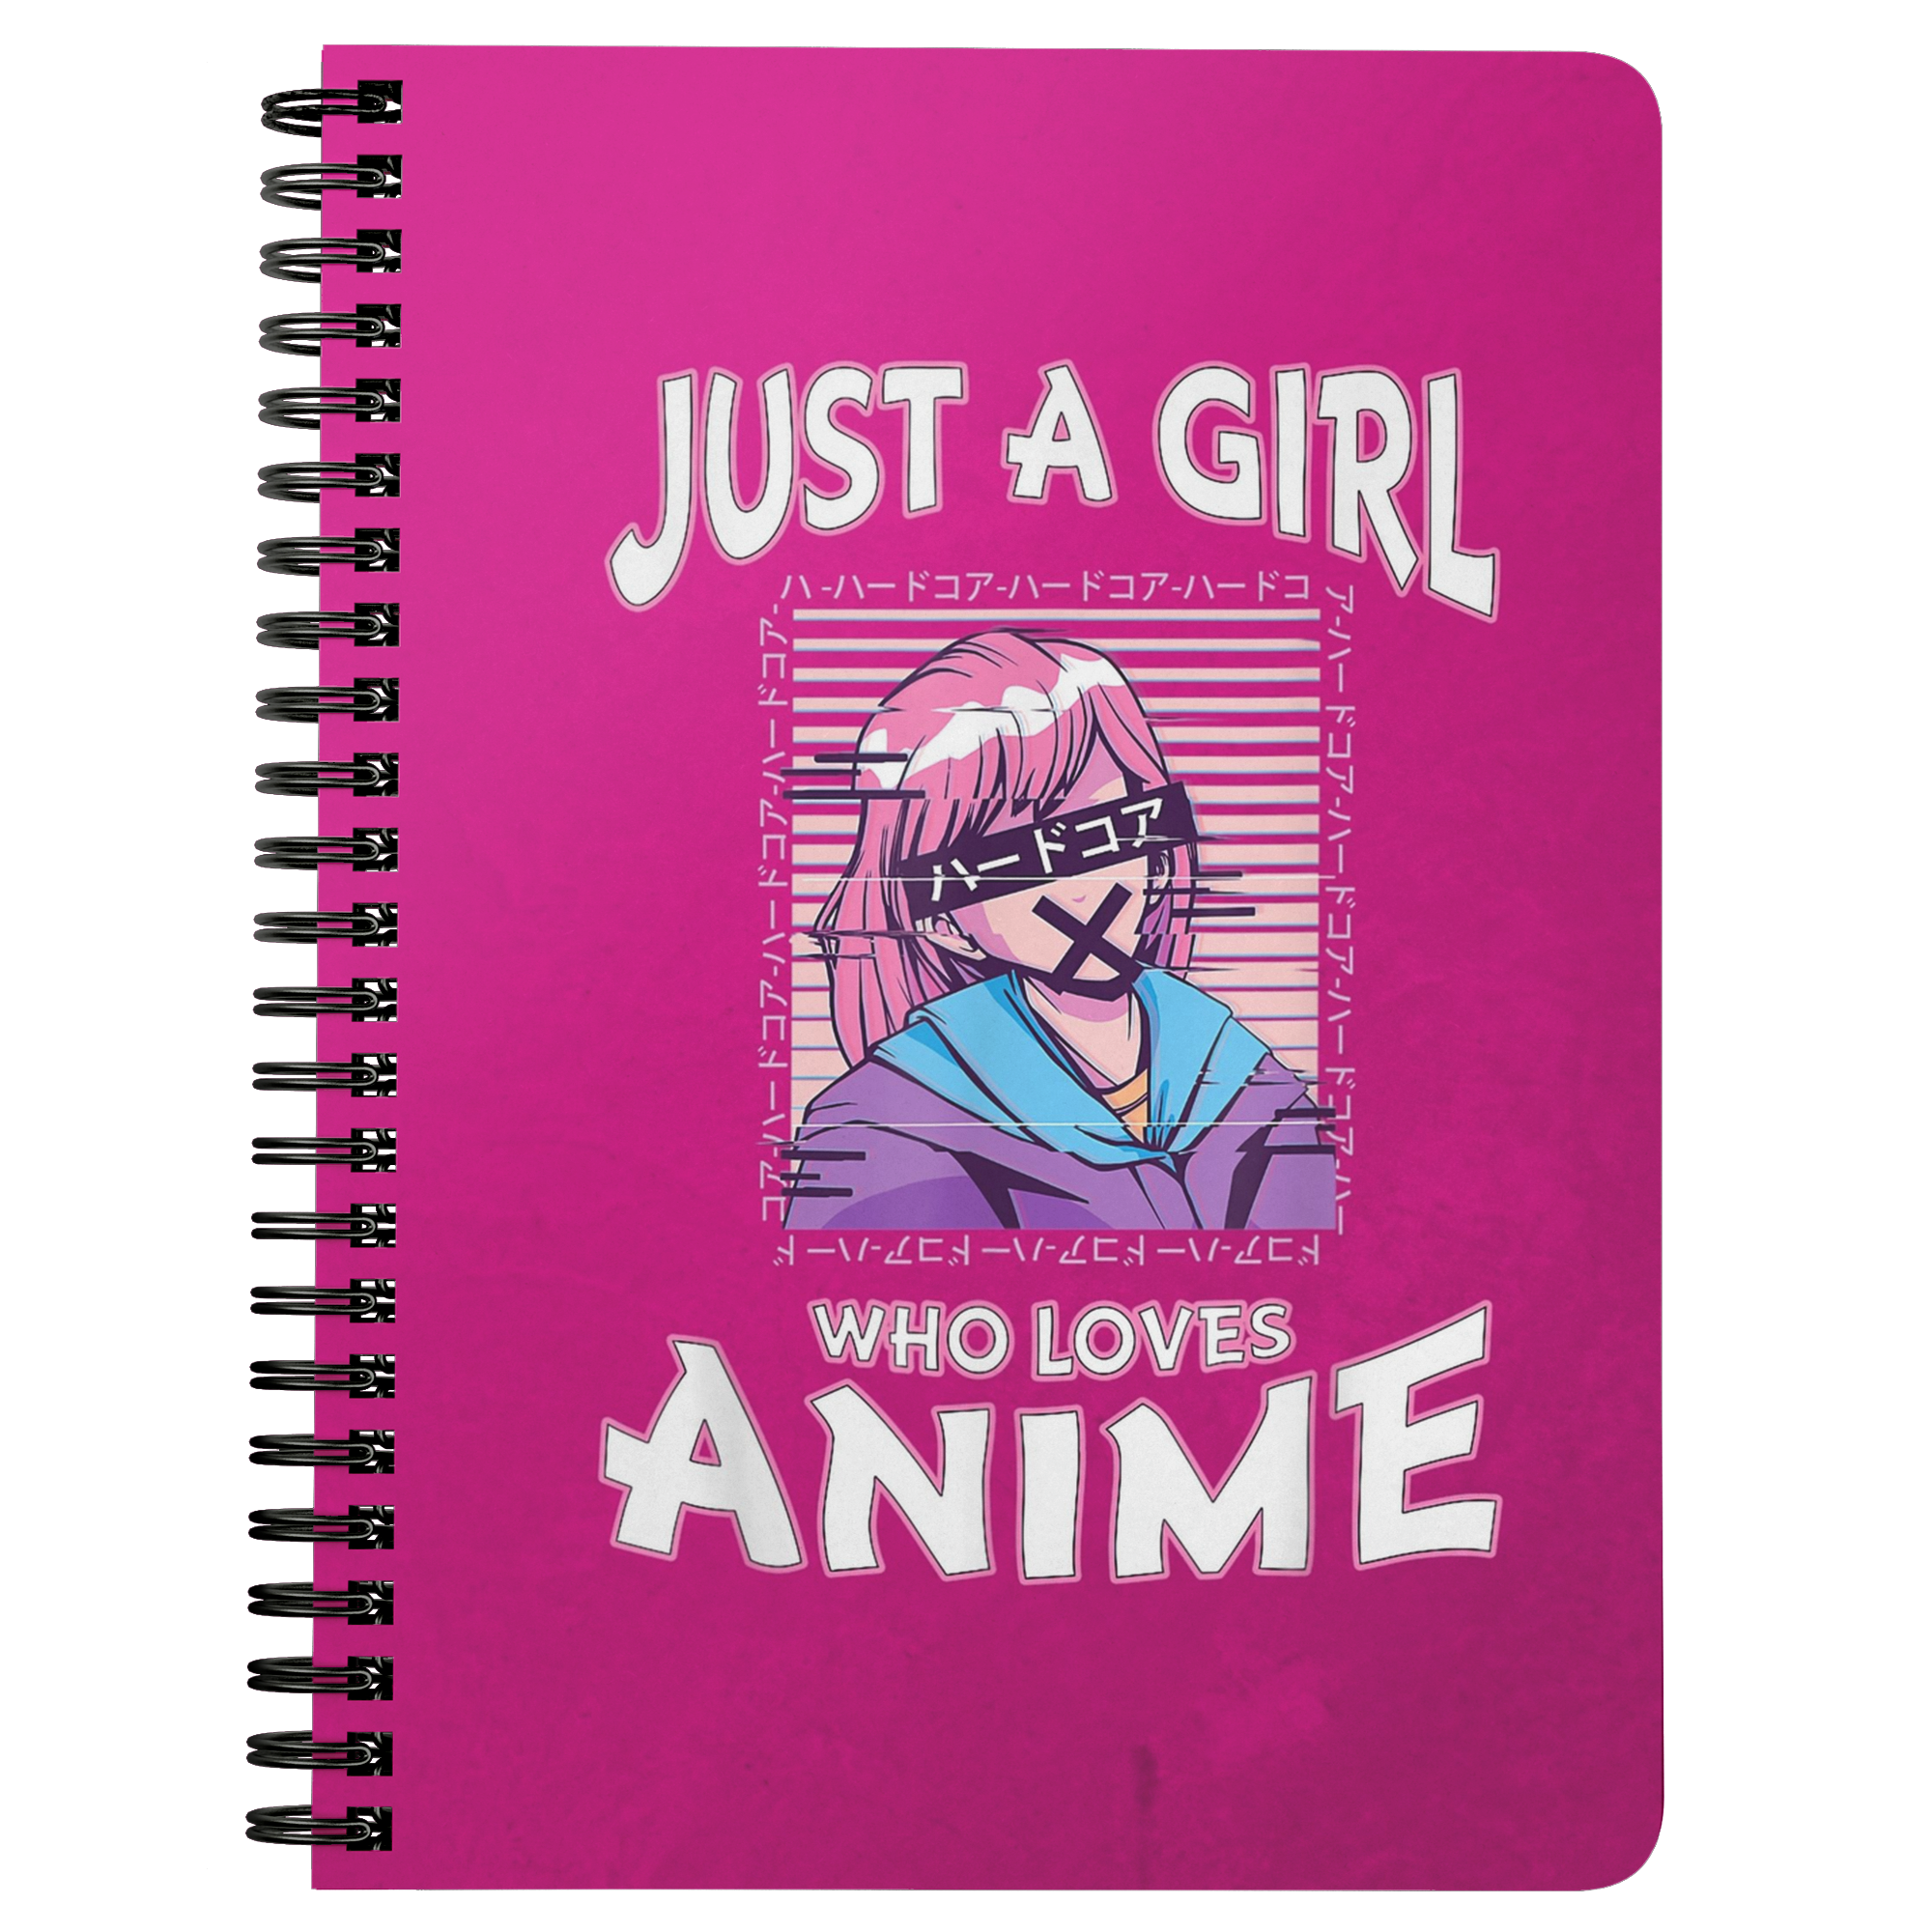 I'M JUST A 14 YEAR OLD GIRL WHO LOVES ANIME: Birthday Gift For Girls. Cute  Anime Lovers Gift For Girls: Anime Notebook / unique lined Journal Gift,  120 Pages, 6x9, Soft Cover